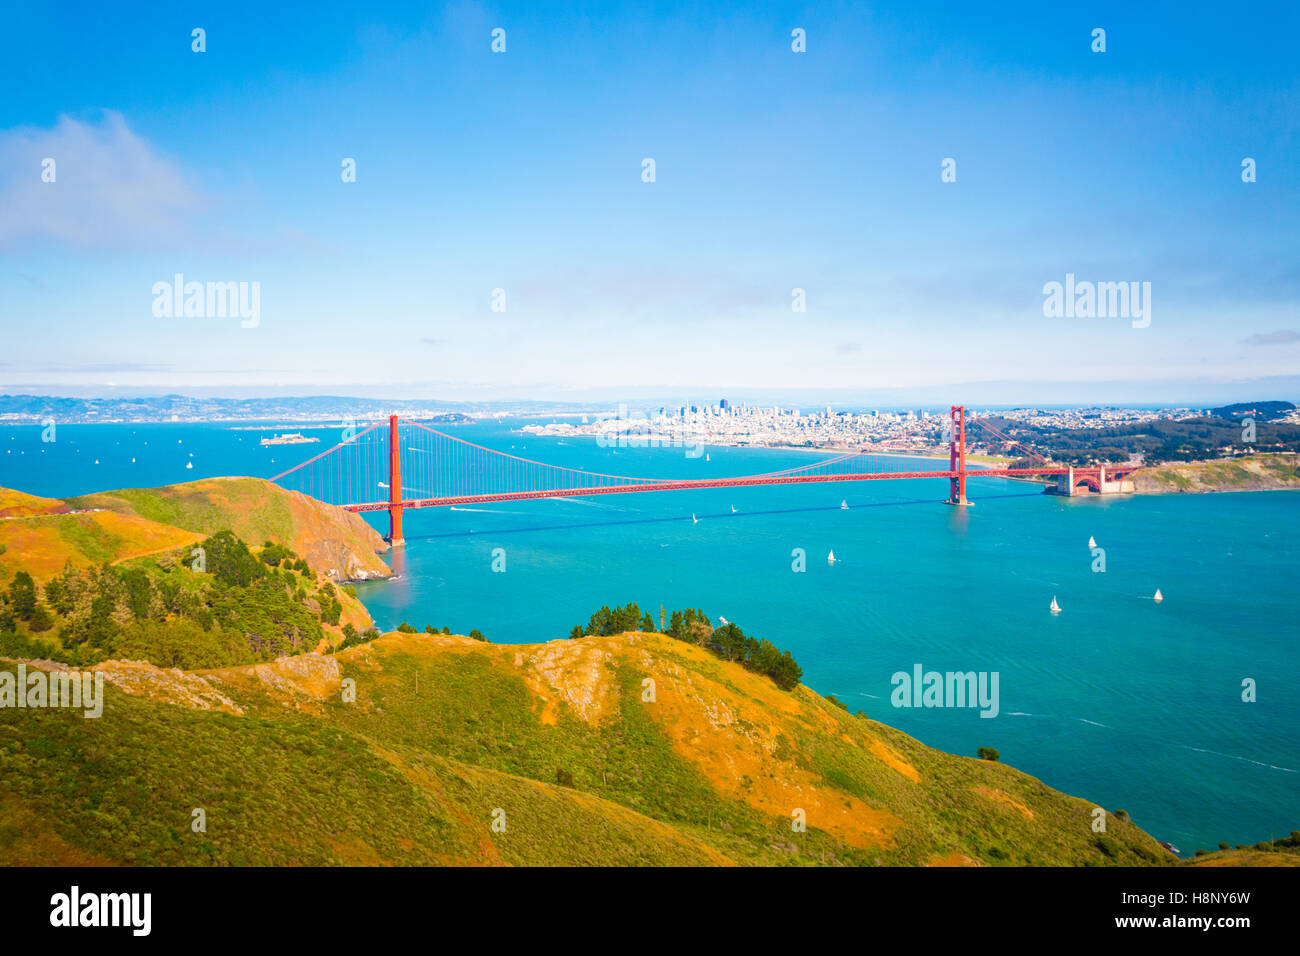 High angle, mid-air, aerial view of downtown San Francisco city, bay seen together with Golden Gate Bridge and hills of Marin he Stock Photo